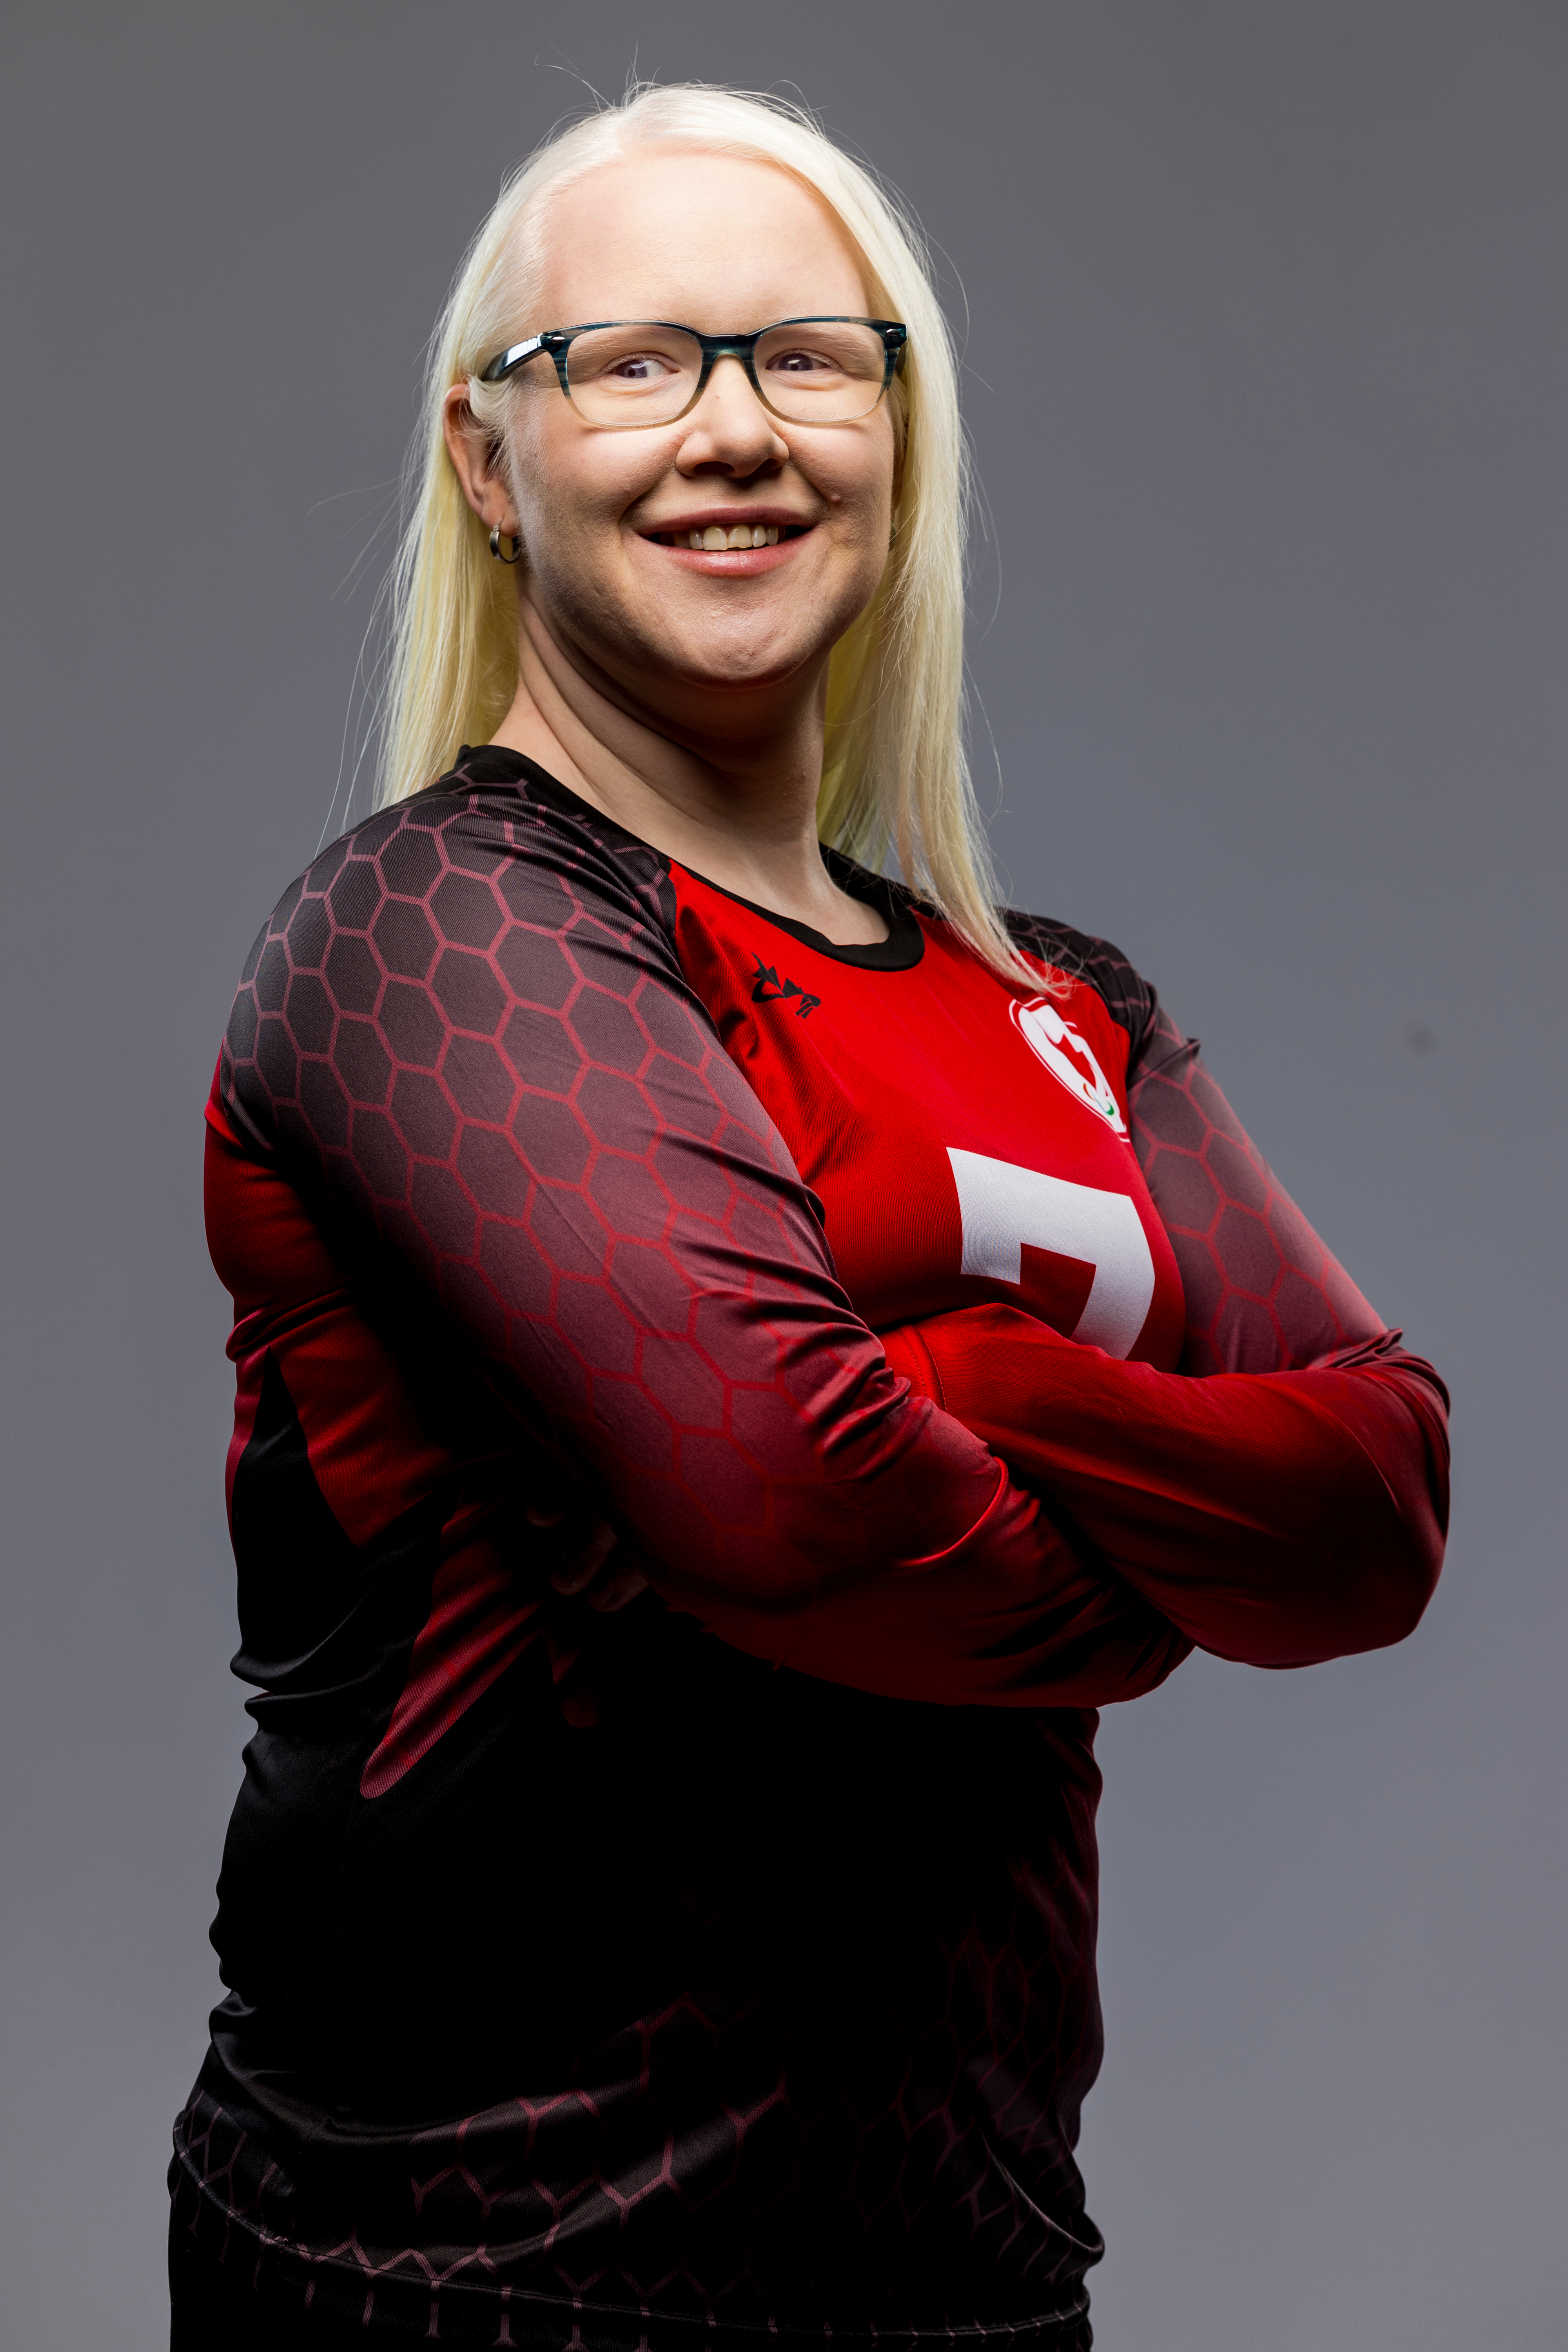 Amy Burk, a Team Canada goalball athlete. Image courtesy of the Canadian Paralympic Committee.